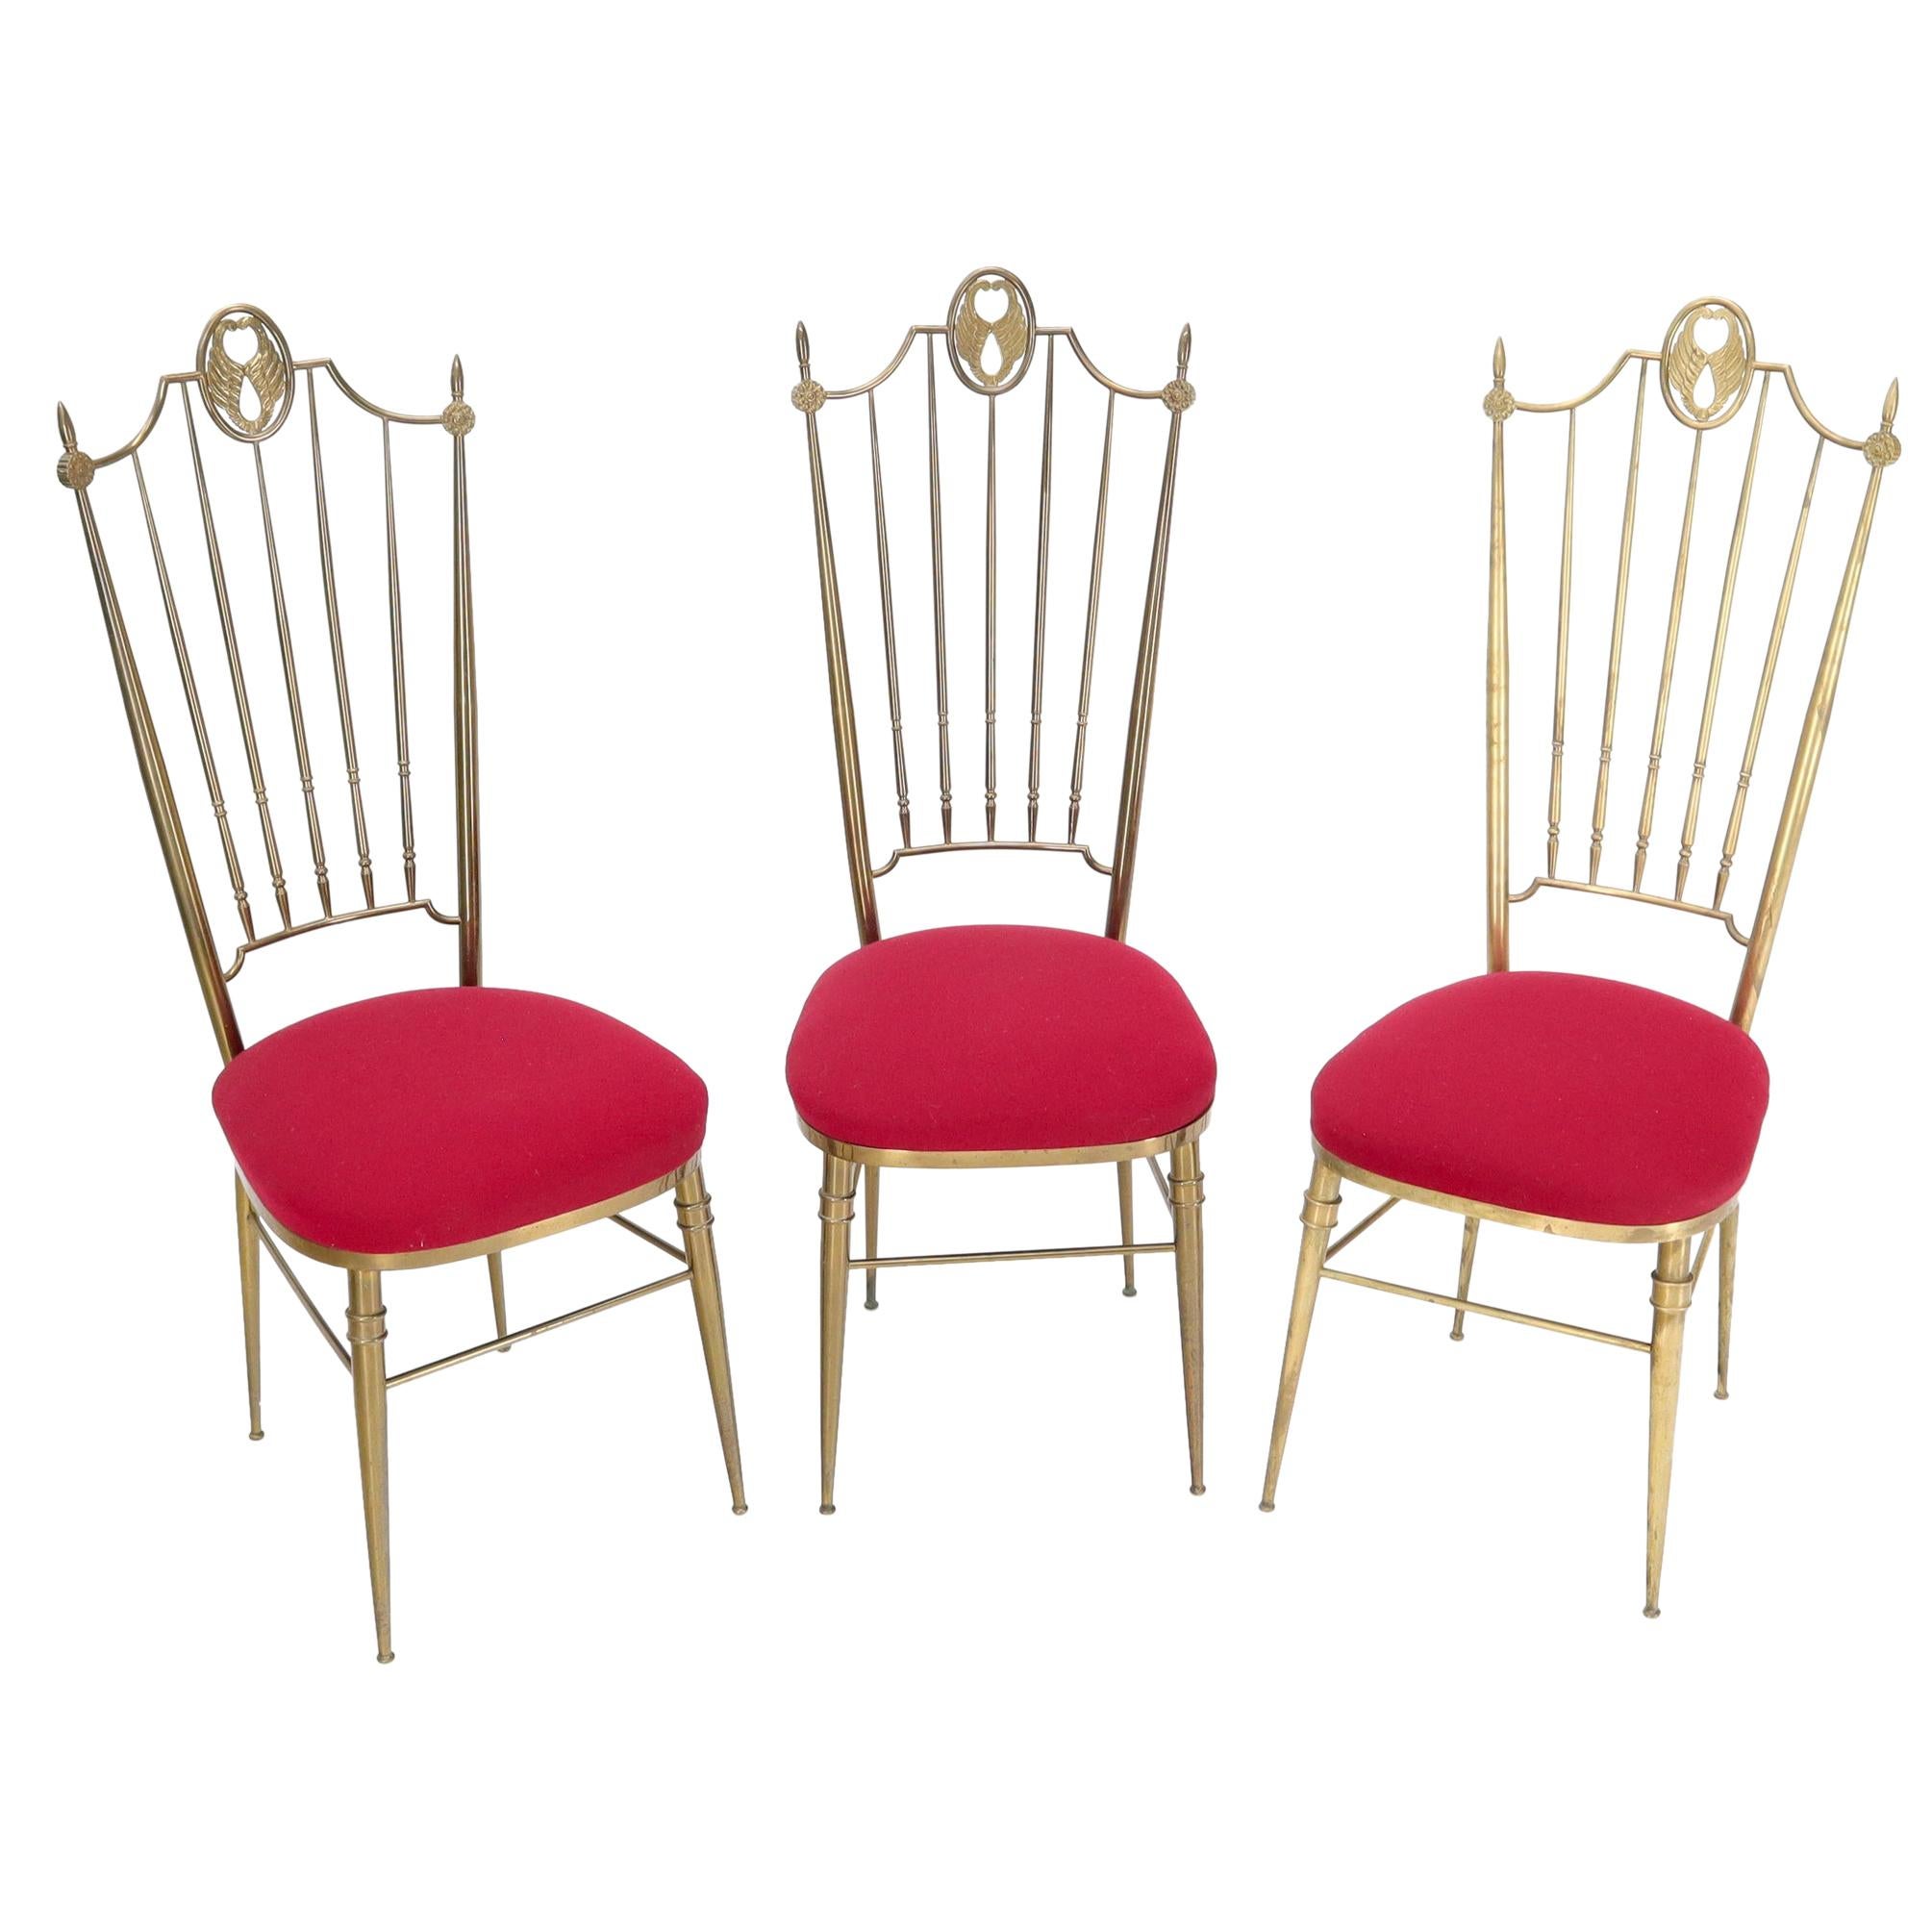 Set of 3 Italian Solid Brass Chiavari Chairs From 1950s New Upholstery